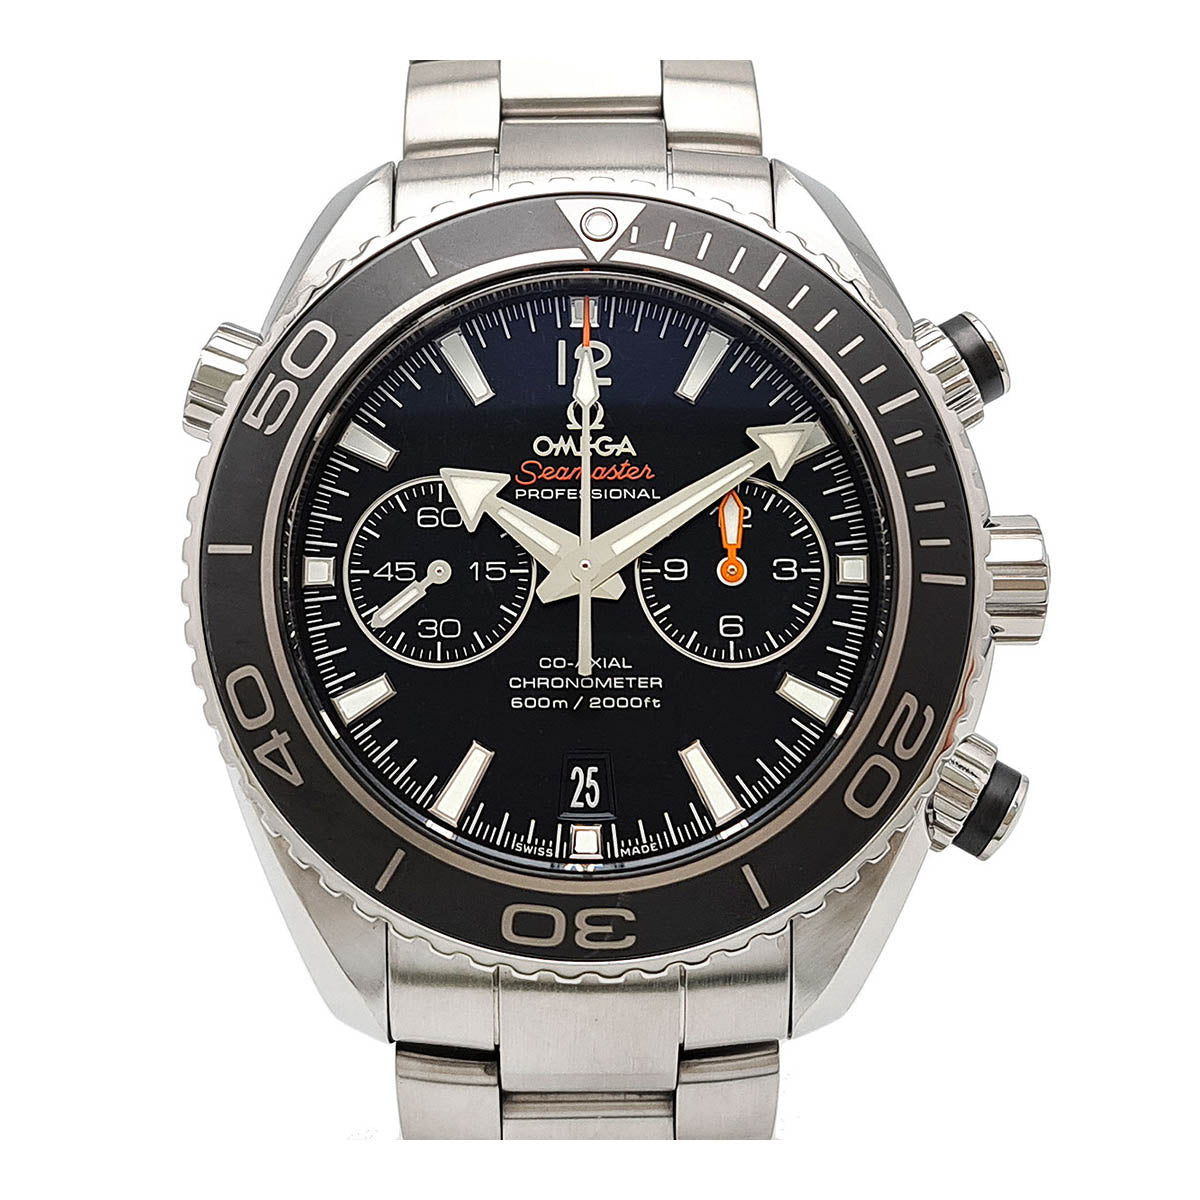 OMEGA Seamaster Planet Ocean Chronograph 232.30.46.51.01.001 Stainless Steel Automatic Men's Watch 232.30.46.51.01.001